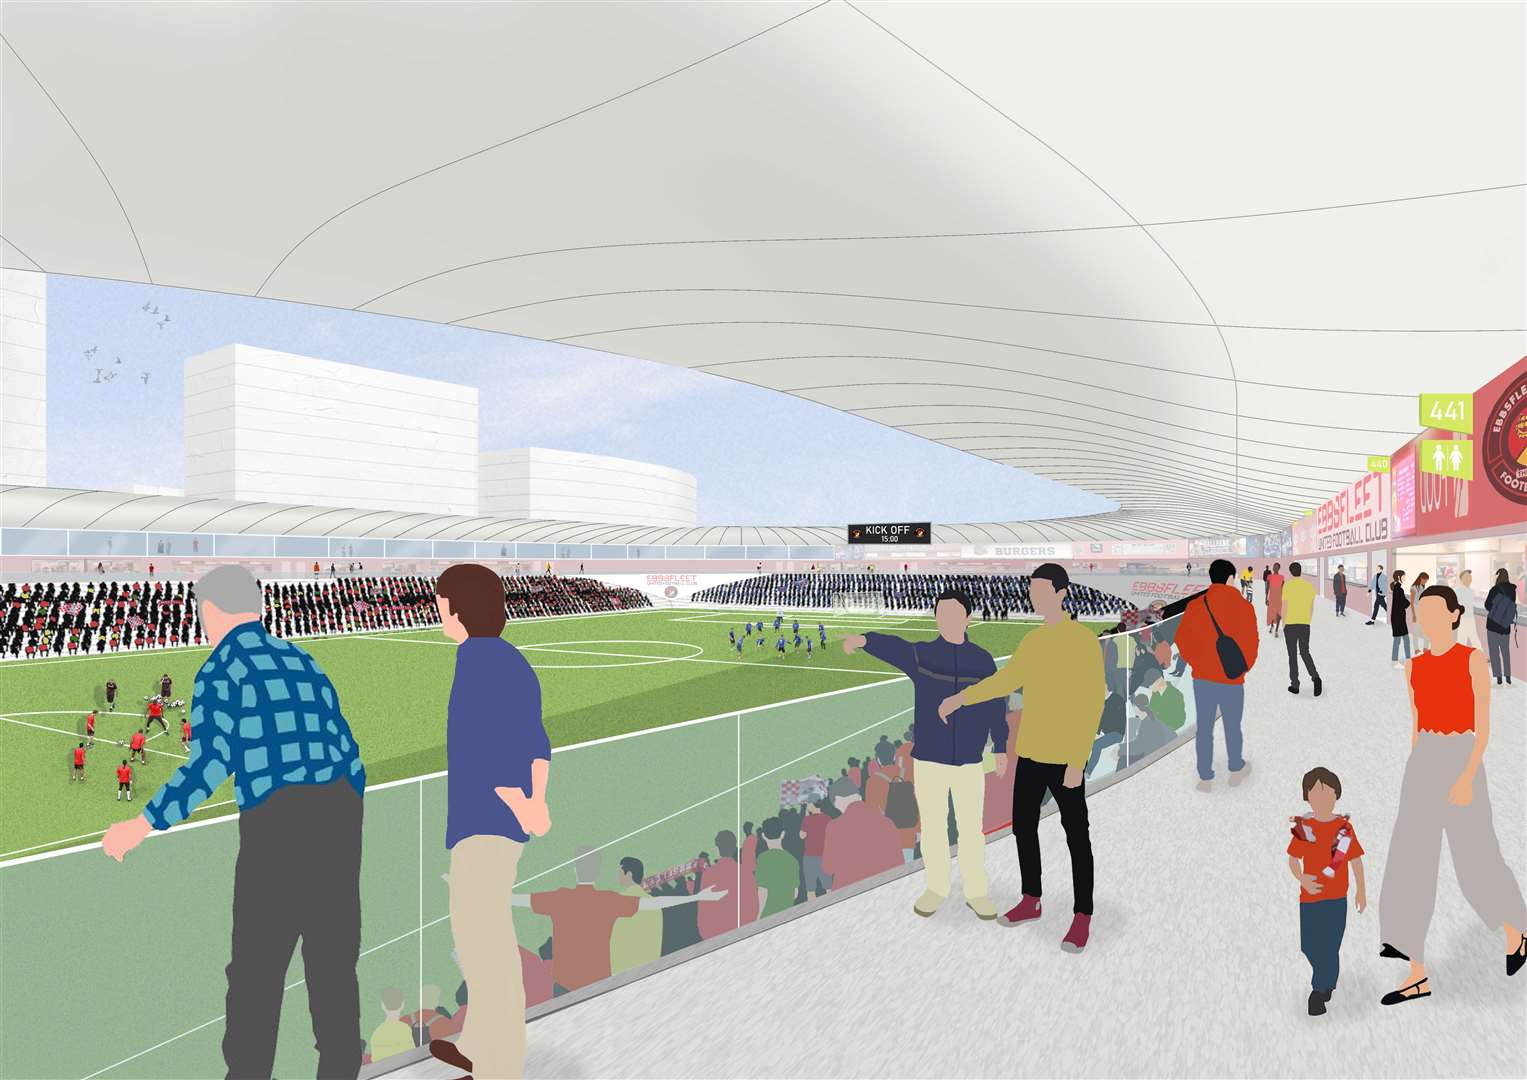 An early artist impression of how the new stadium could look. Picture: Northfleet Harbourside